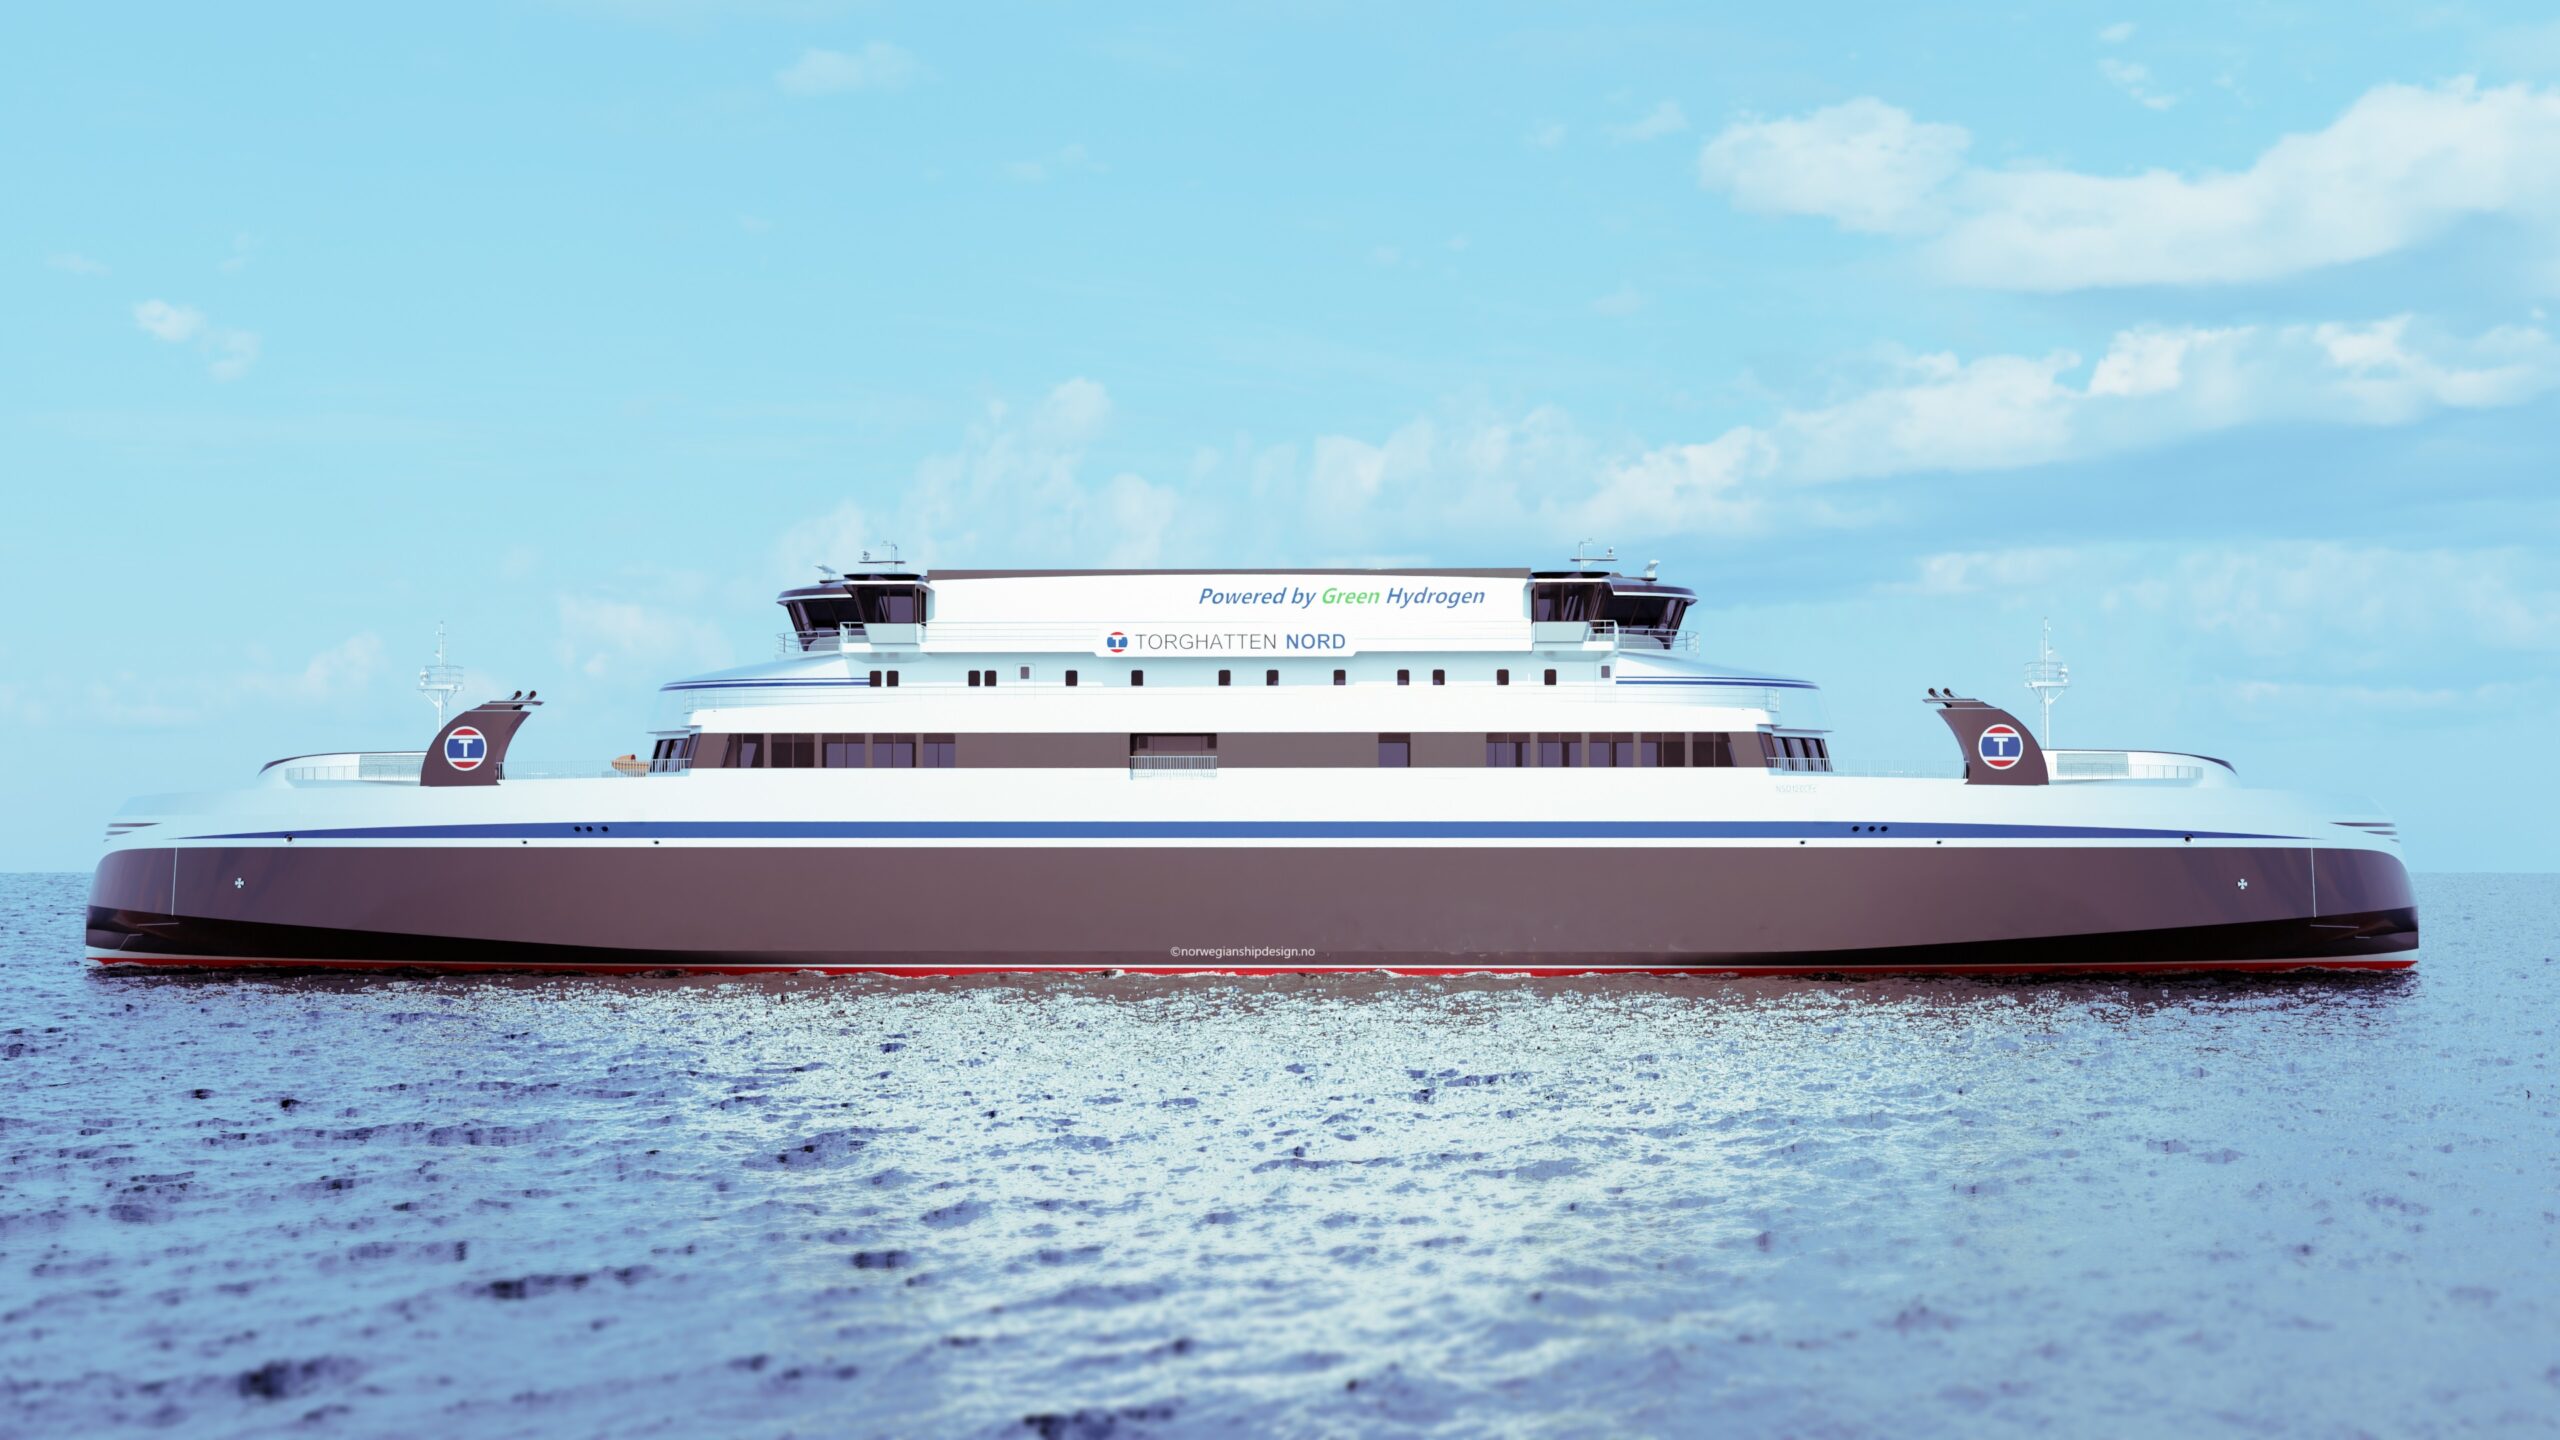 Fot. Graphical rendering of the newbuilding RoPax (courtesy Norwegian Ship Design). The new ferries will be about 120 m long with capacity for 120 cars and 599 passengers. They will serve a close to 100 km open ocean crossing above the Arctic Circle that is considered Norway’s most challenging ferry crossing